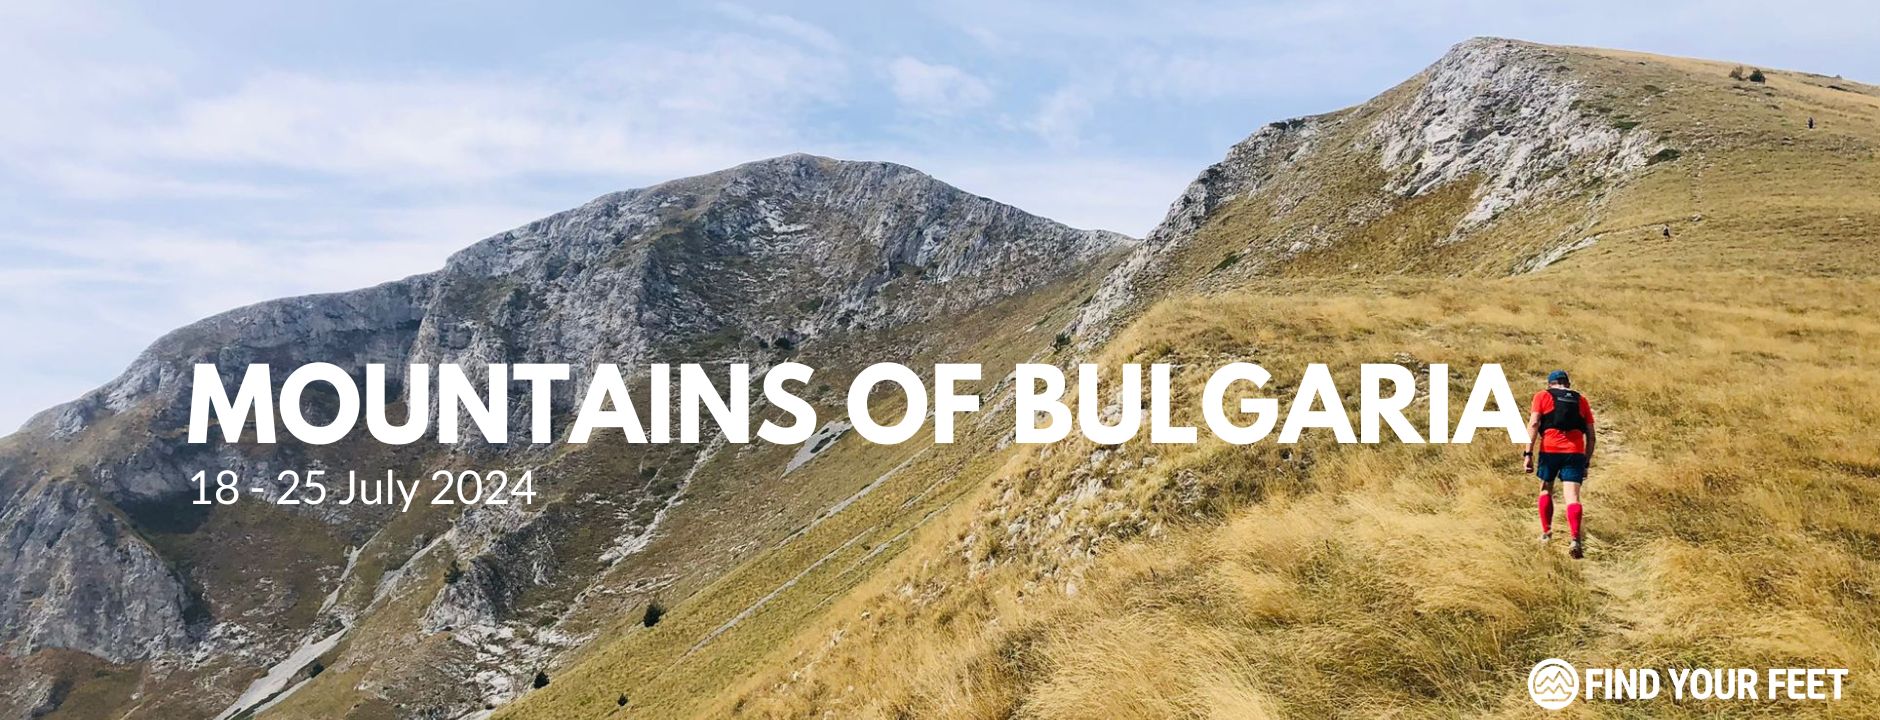 Mountains Of Bulgaria Trail Running Find Your Feet